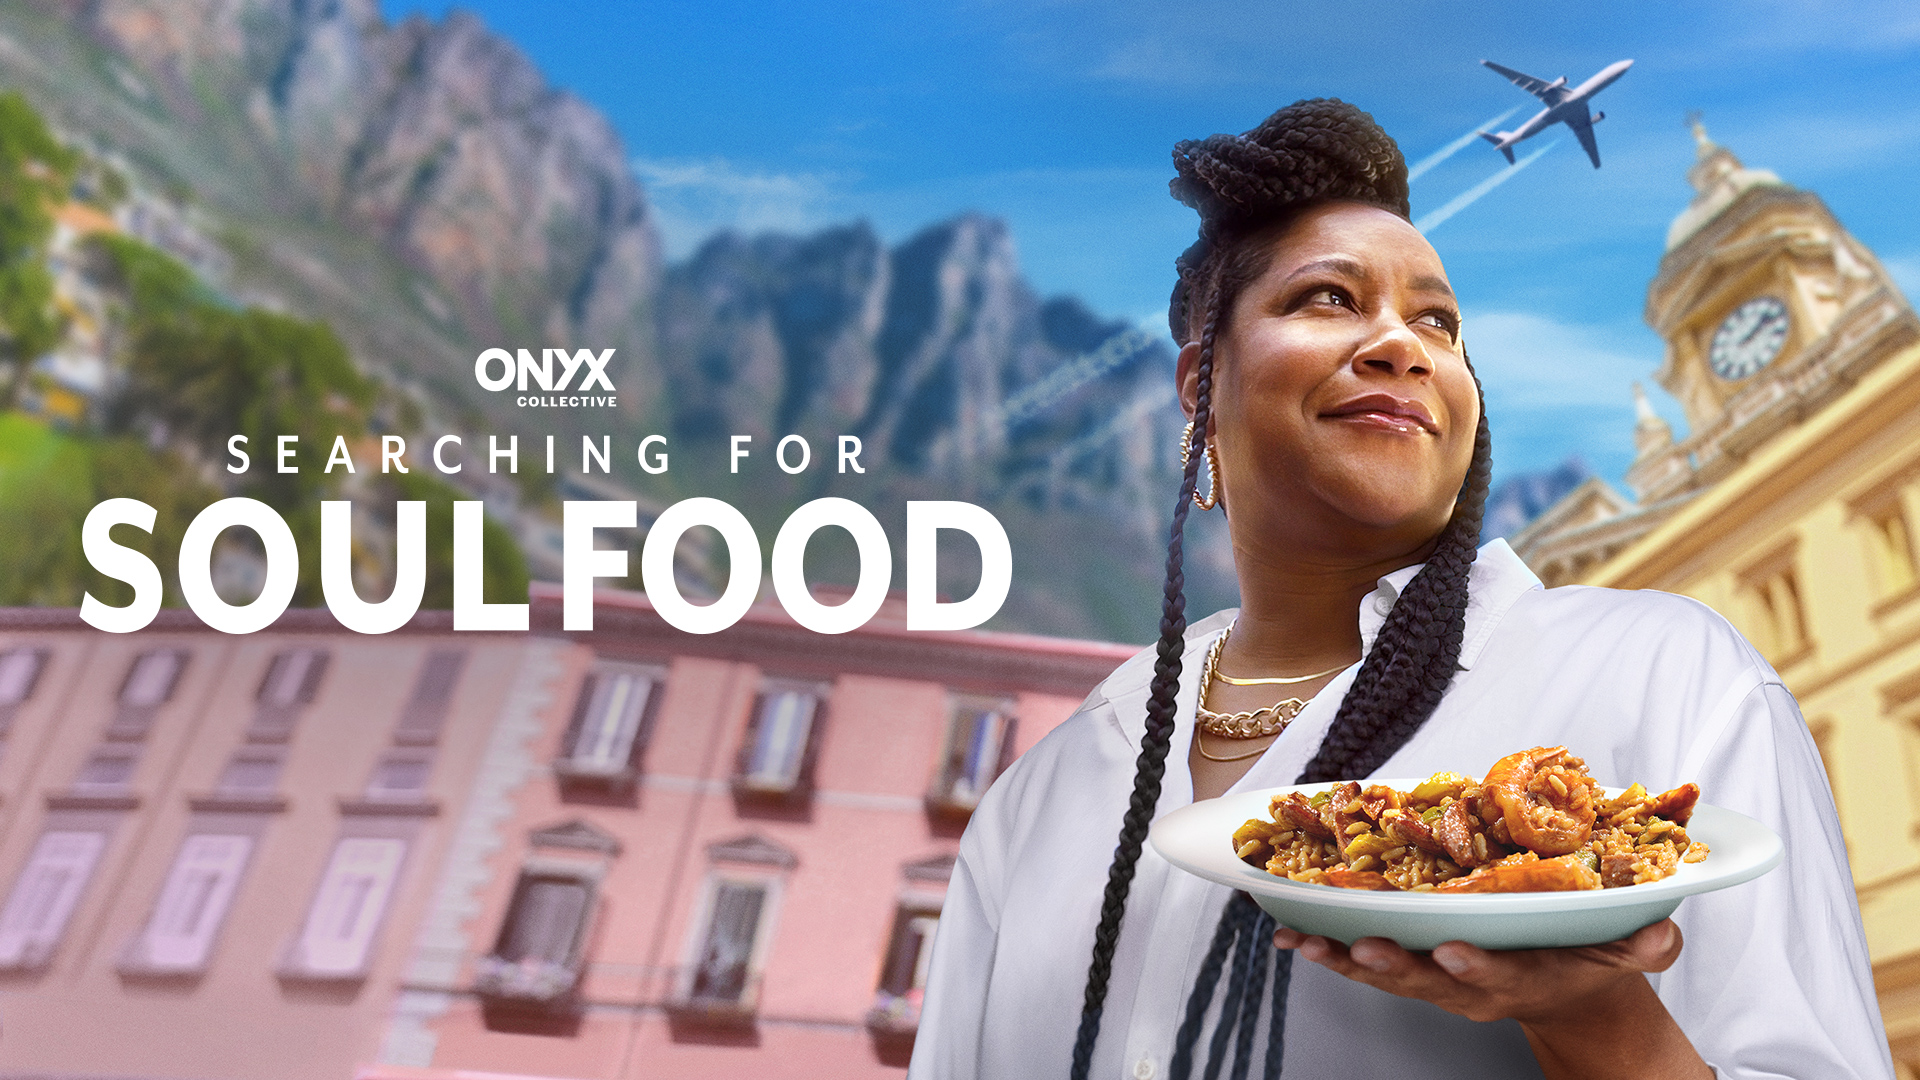 Chef Alisa Reynolds stars in new show "Searching for Soul Food" on Hulu (Photo courtesy of Hulu)